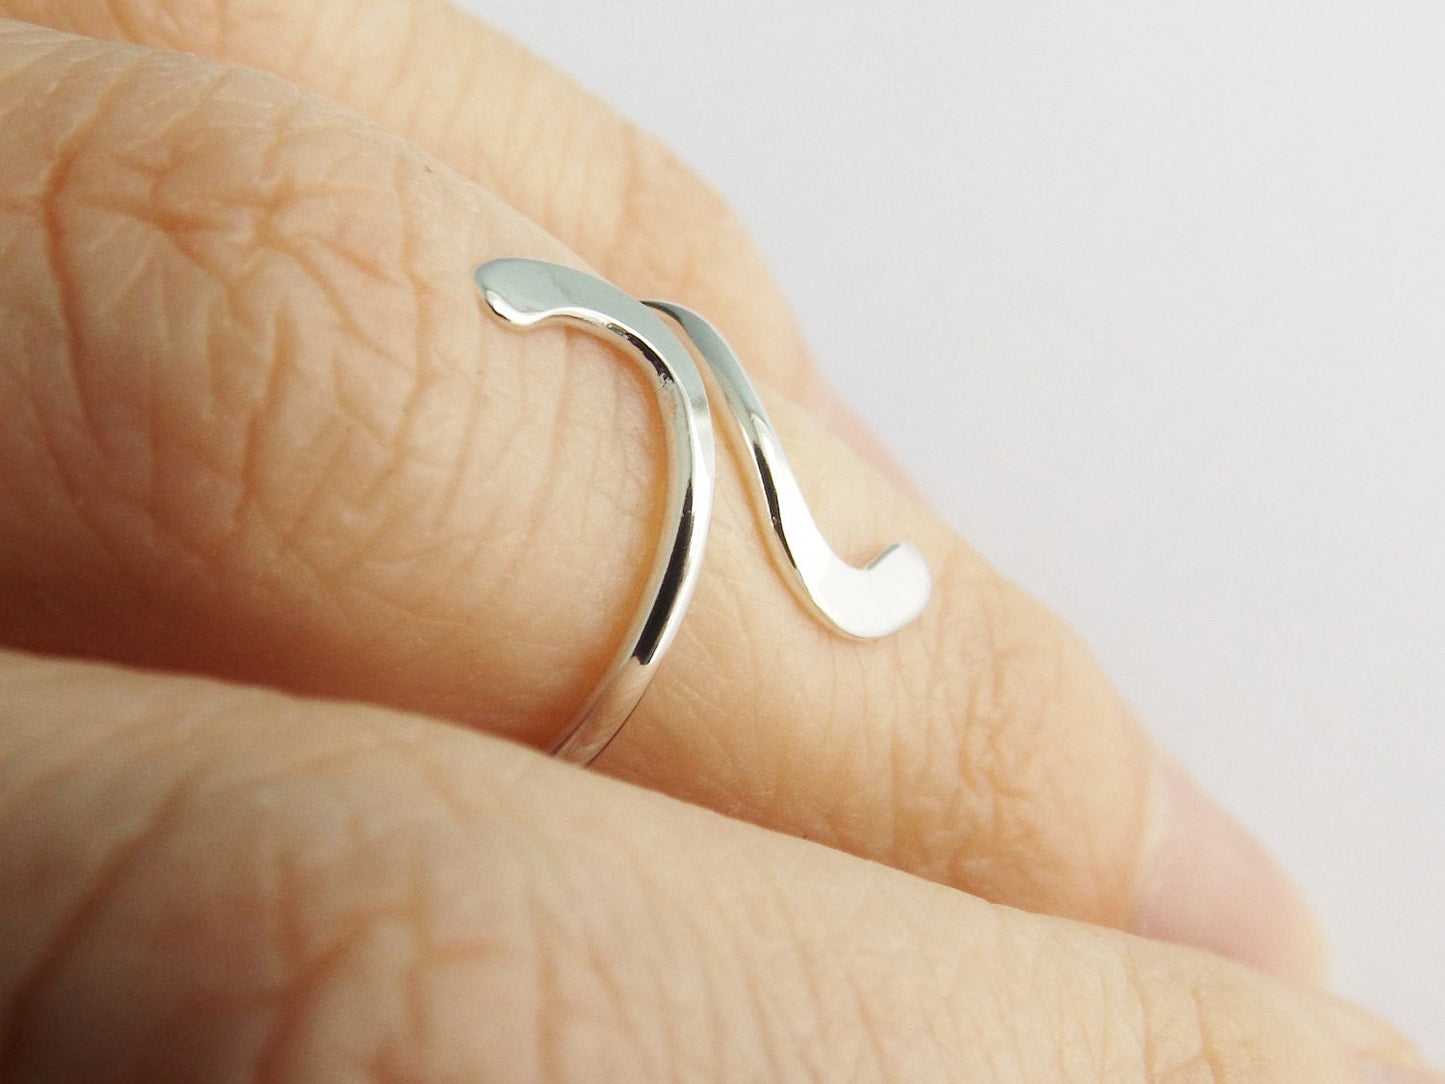 Knuckle Ring, Knuckle Rings, Stacking Rings, above knuckle ring, Tri Tone Knuckle Rings,  Toe Rings, Rings, Sterling Silver Knuckle Ring